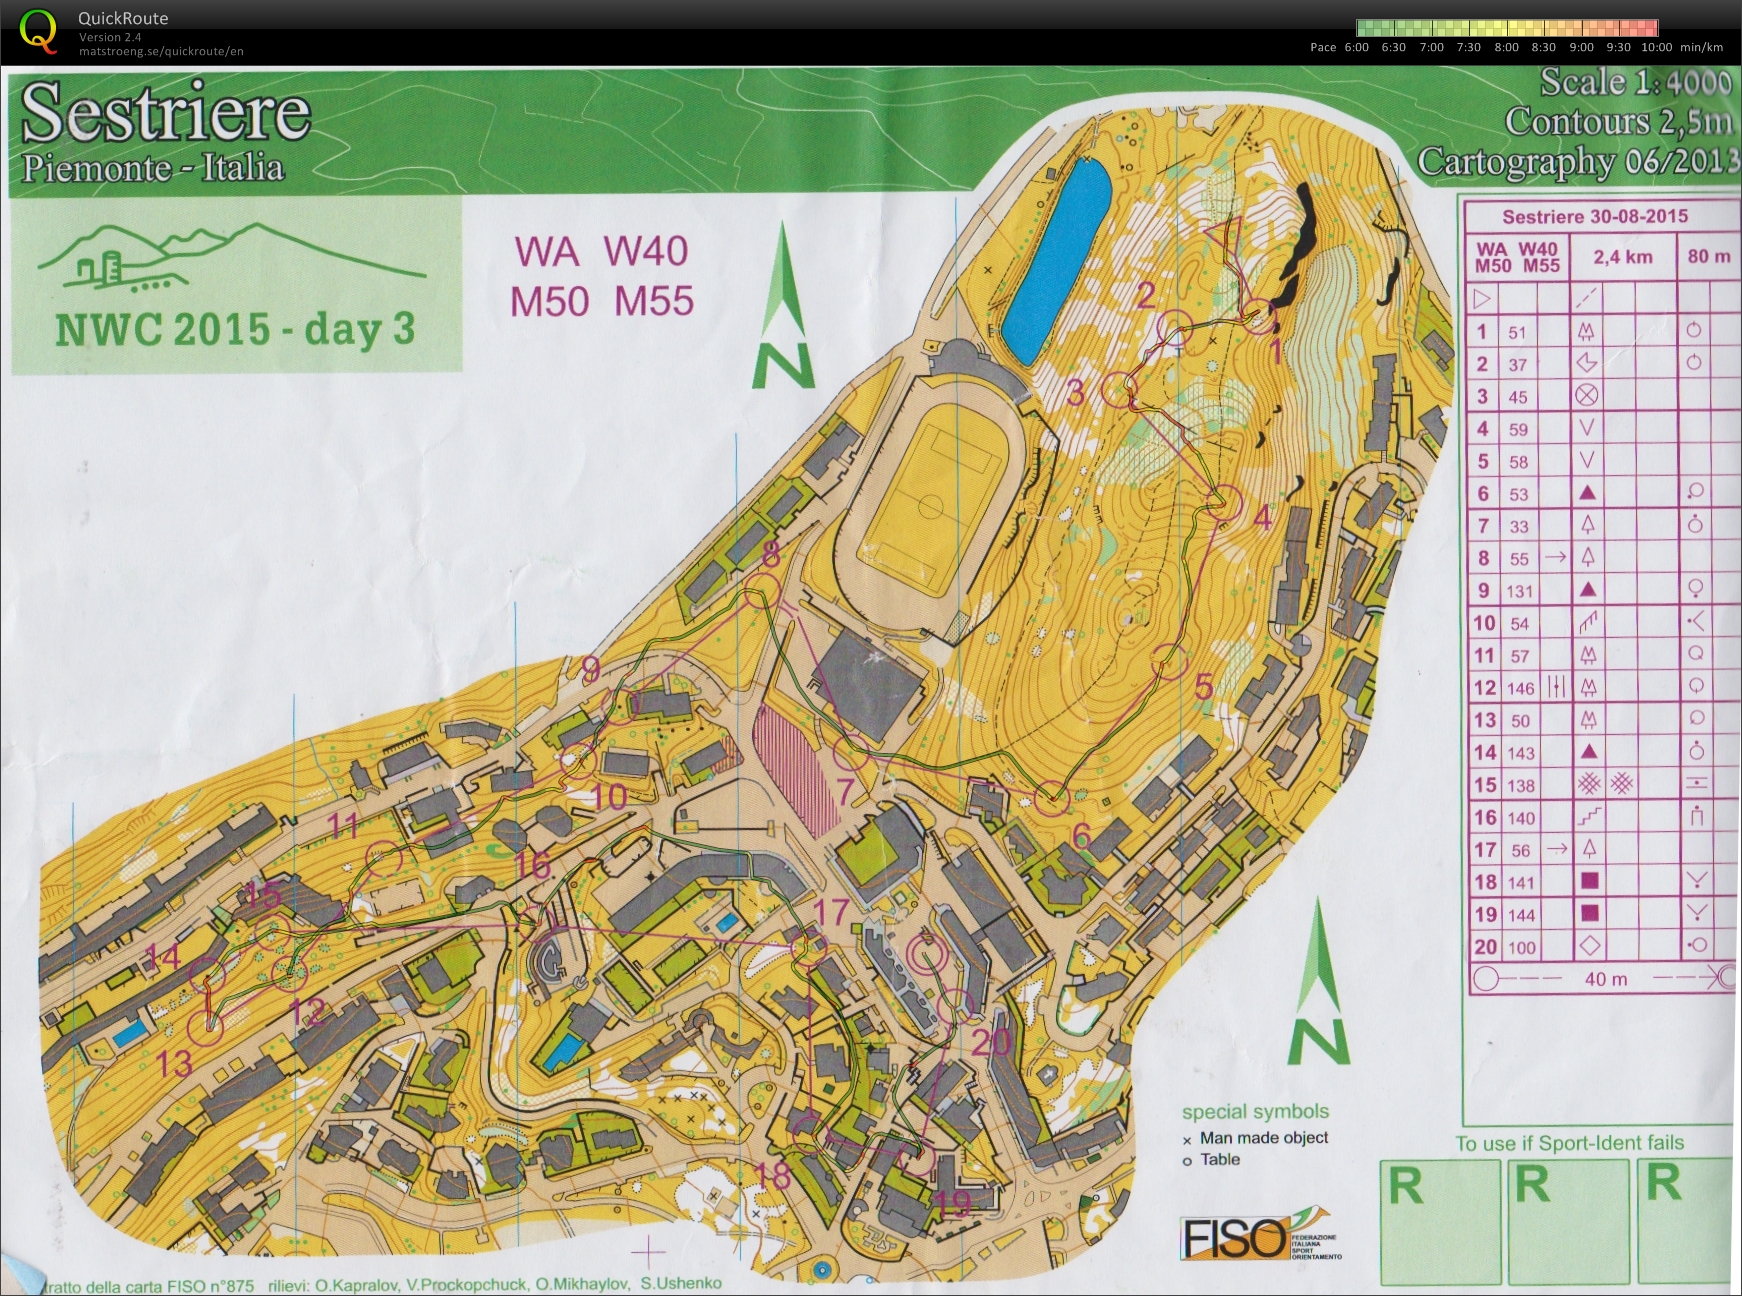 North west cup - Sestriere - Day 3 - M50 (30.08.2015)